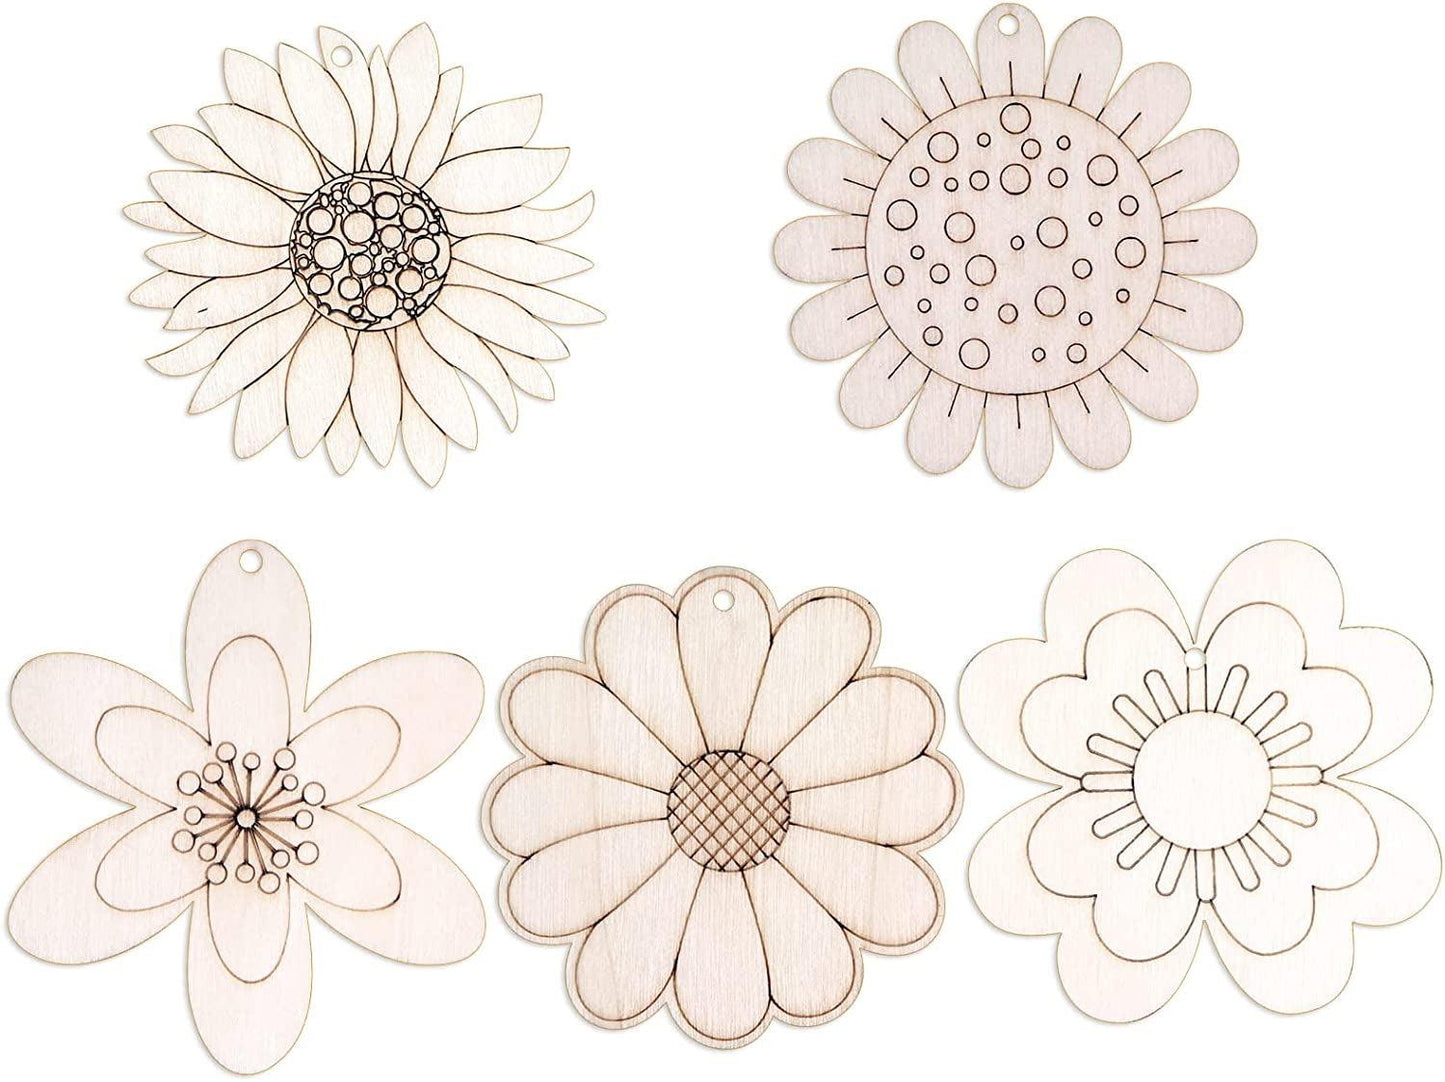 50 Pieces Sunflower Wood Cutout Unfinished Wood Cutouts Flower Shape Wood Craft Cutouts 3.1In for DIY Craft, with Rope - WoodArtSupply